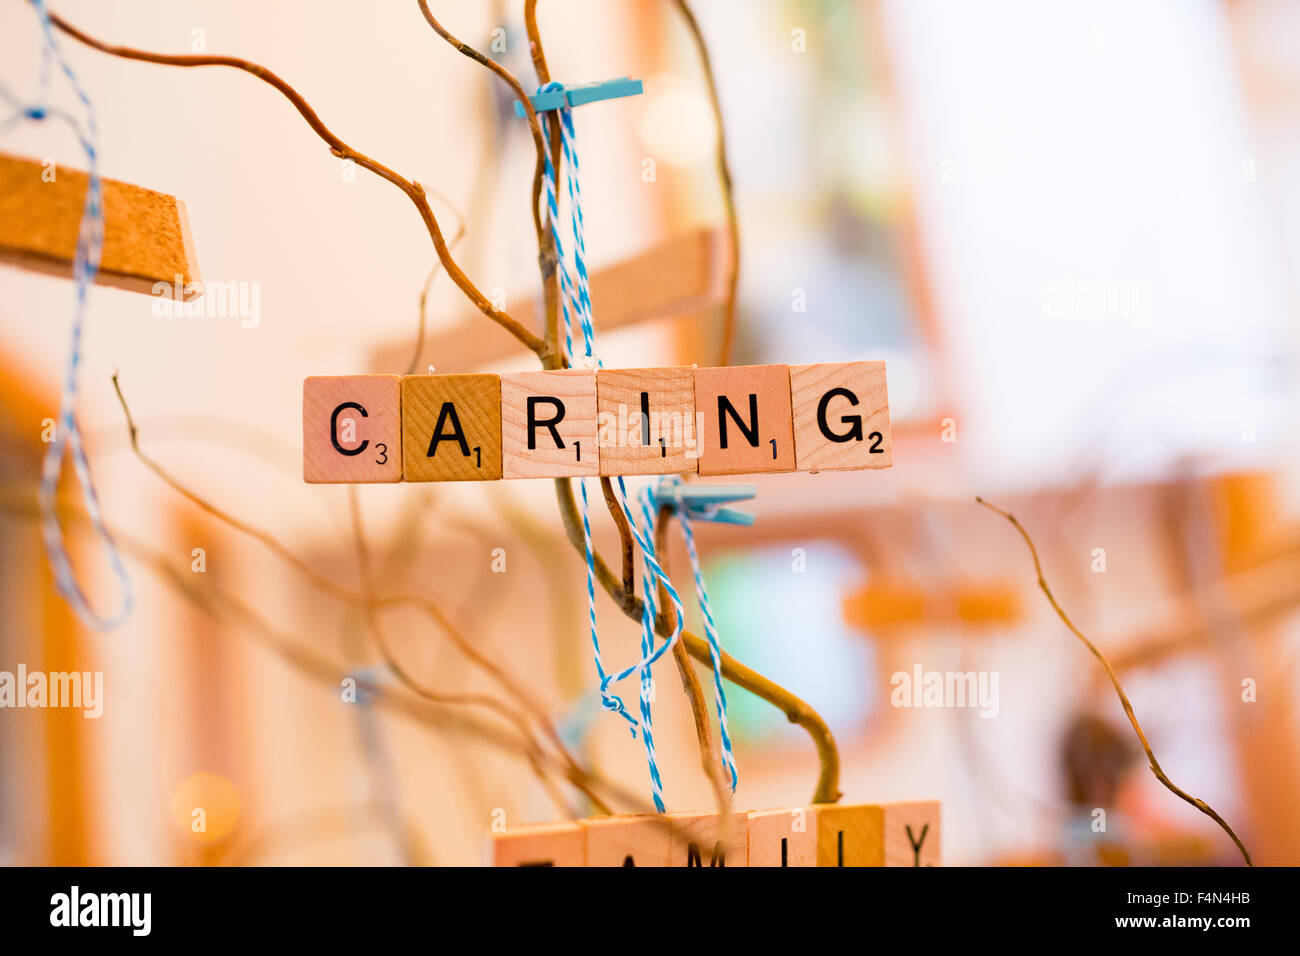 Scrabble letters at a wedding reception are used as decor to spell out the word caring. Stock Photo